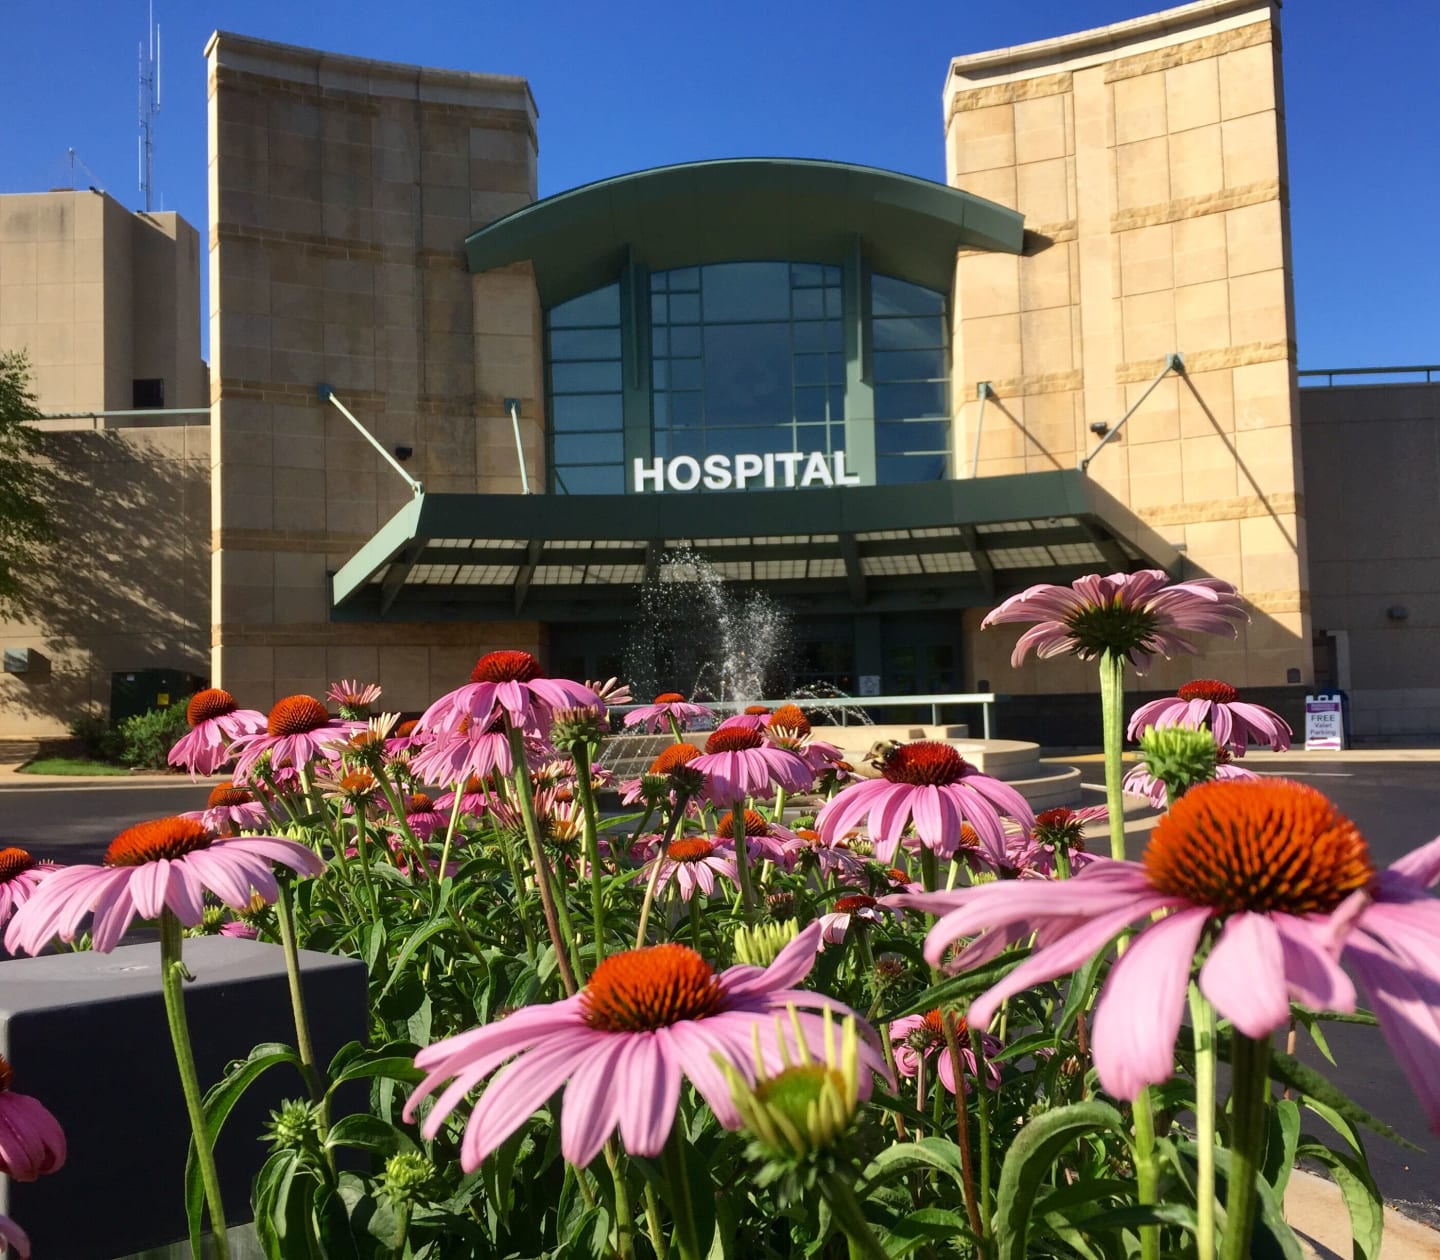 Flowers in front of the main entrance to Swedish American Hospital